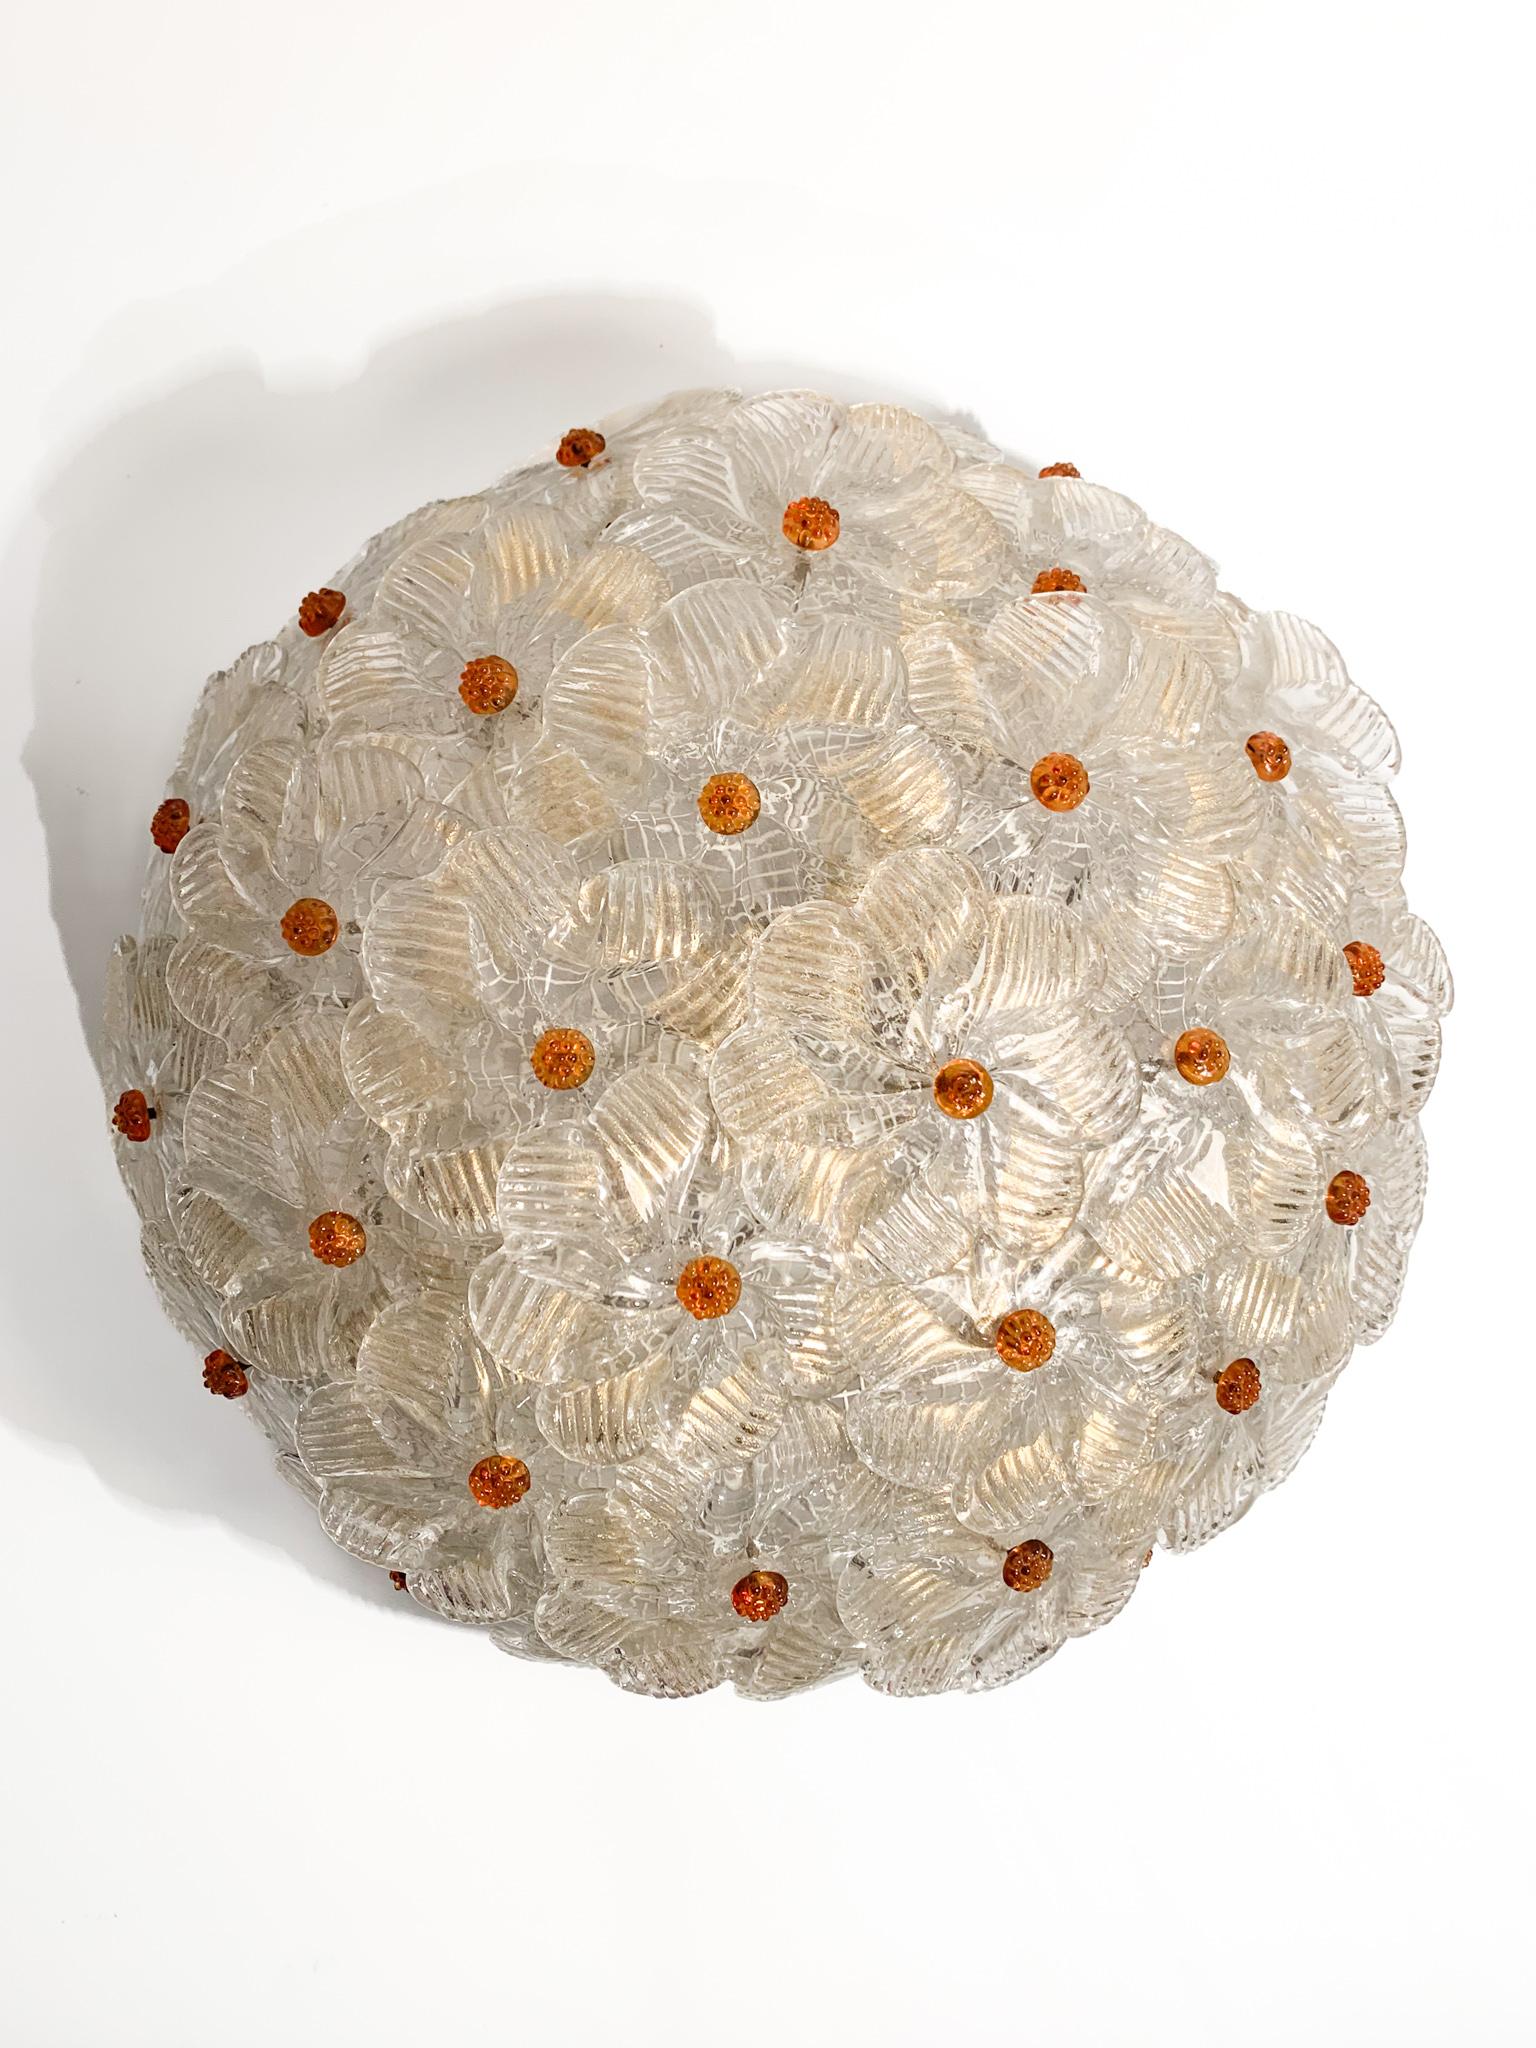 Millefiori ceiling light in golden Murano glass, with two lights, made by Barovier & Toso in the 1950s

Ø cm 36 h cm 16

Barovier & Toso is a glass factory, known for its handcrafted collections of decorative Murano glass in the 20th century. The